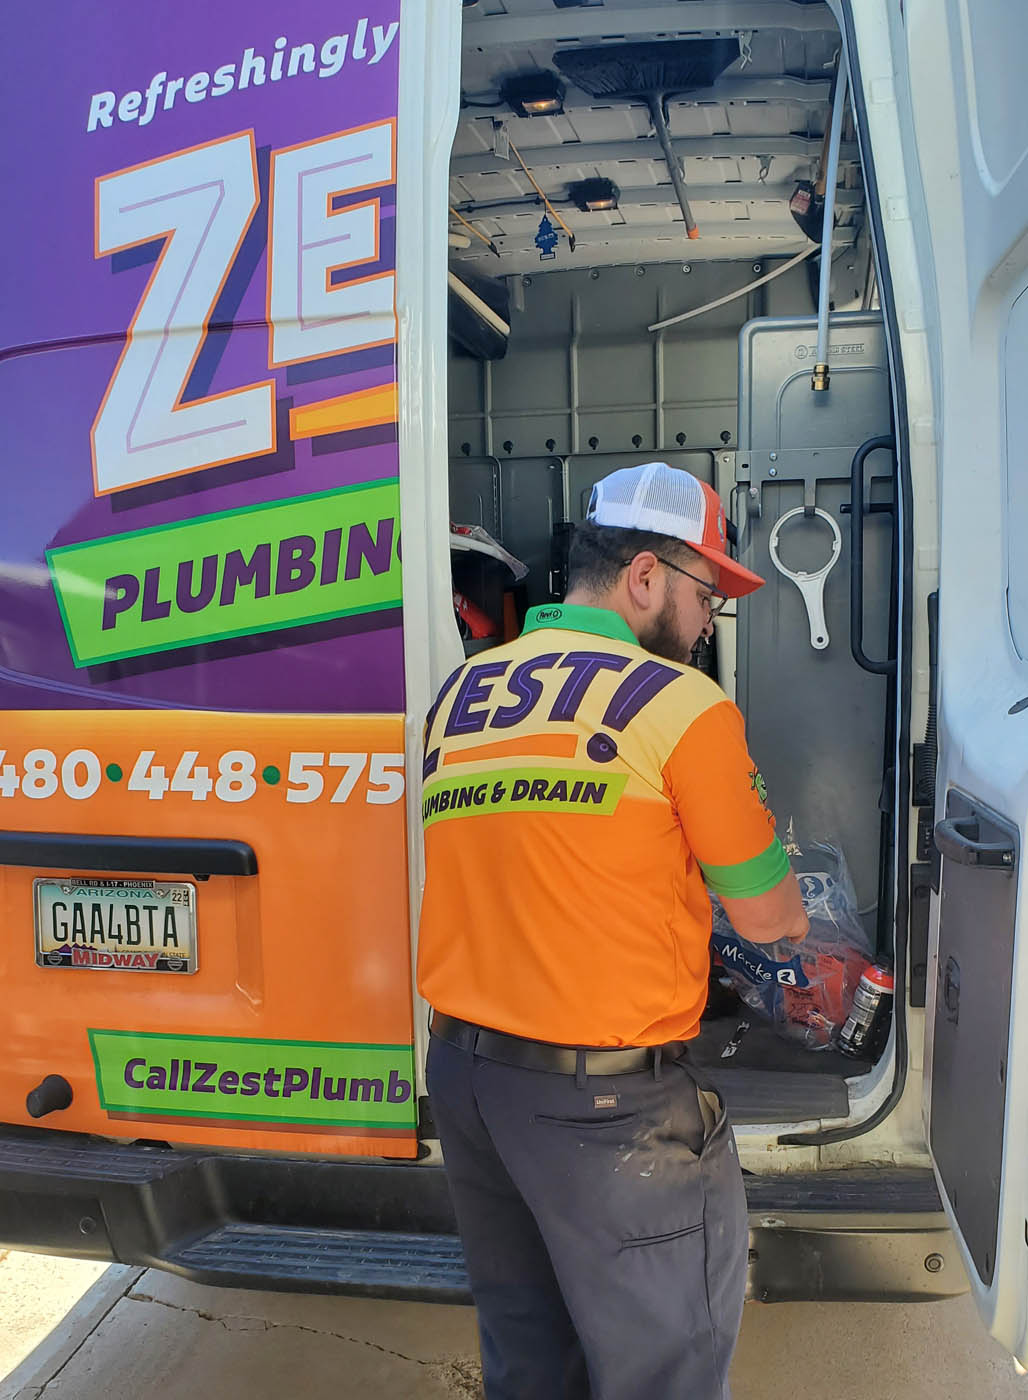 A Zest Plumbing & Drain technician getting equipment out of their truck to work on a water filter service in Scottsdale, AZ.